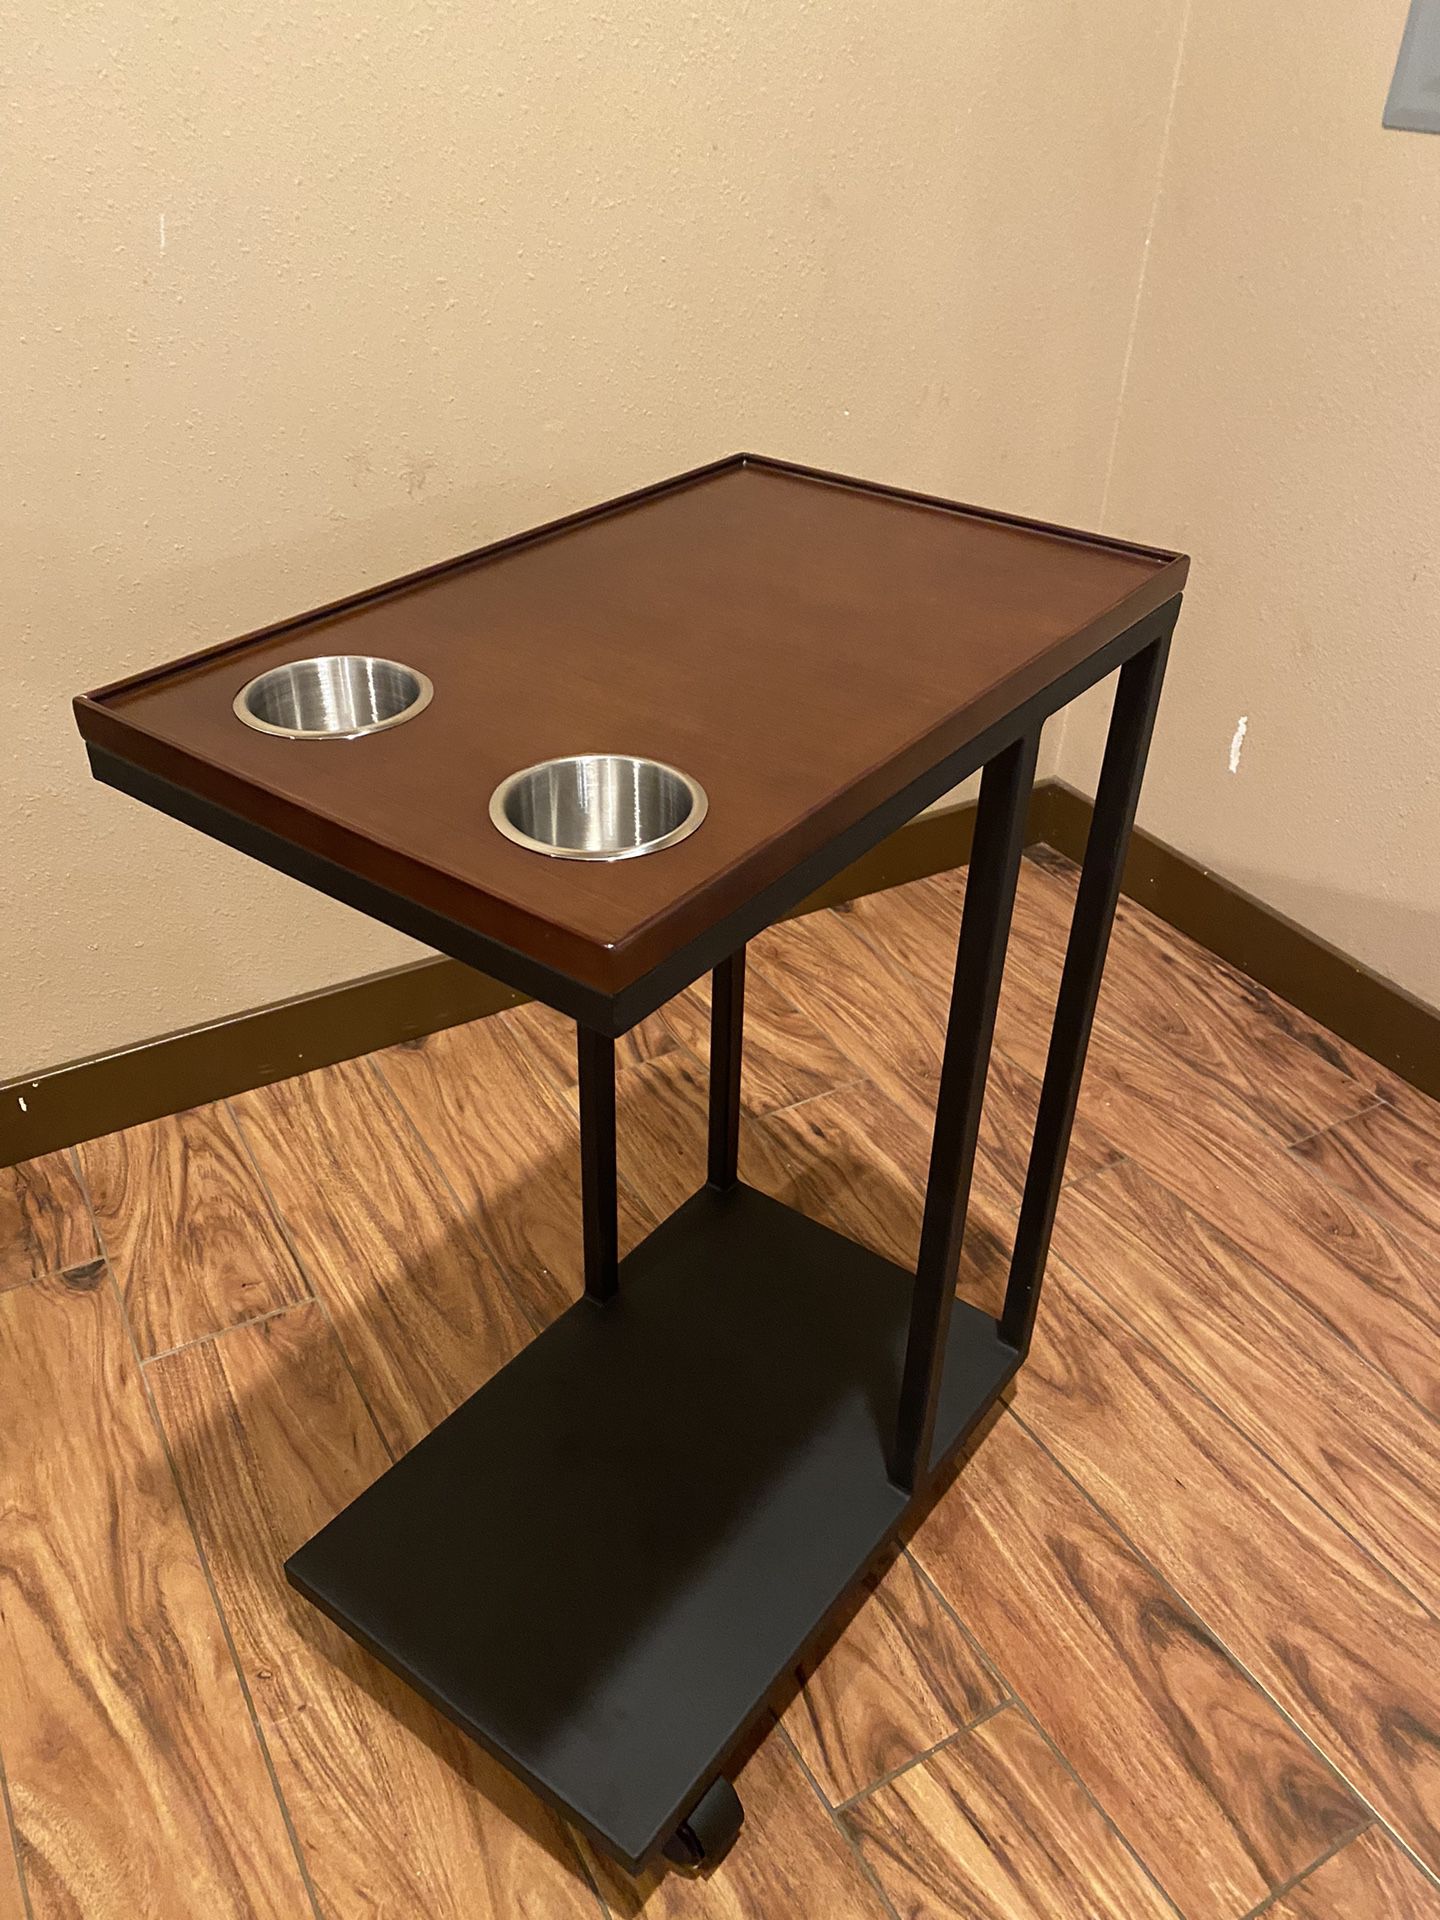 Beverage And Service Cart with Cut Outs for Cup Holders